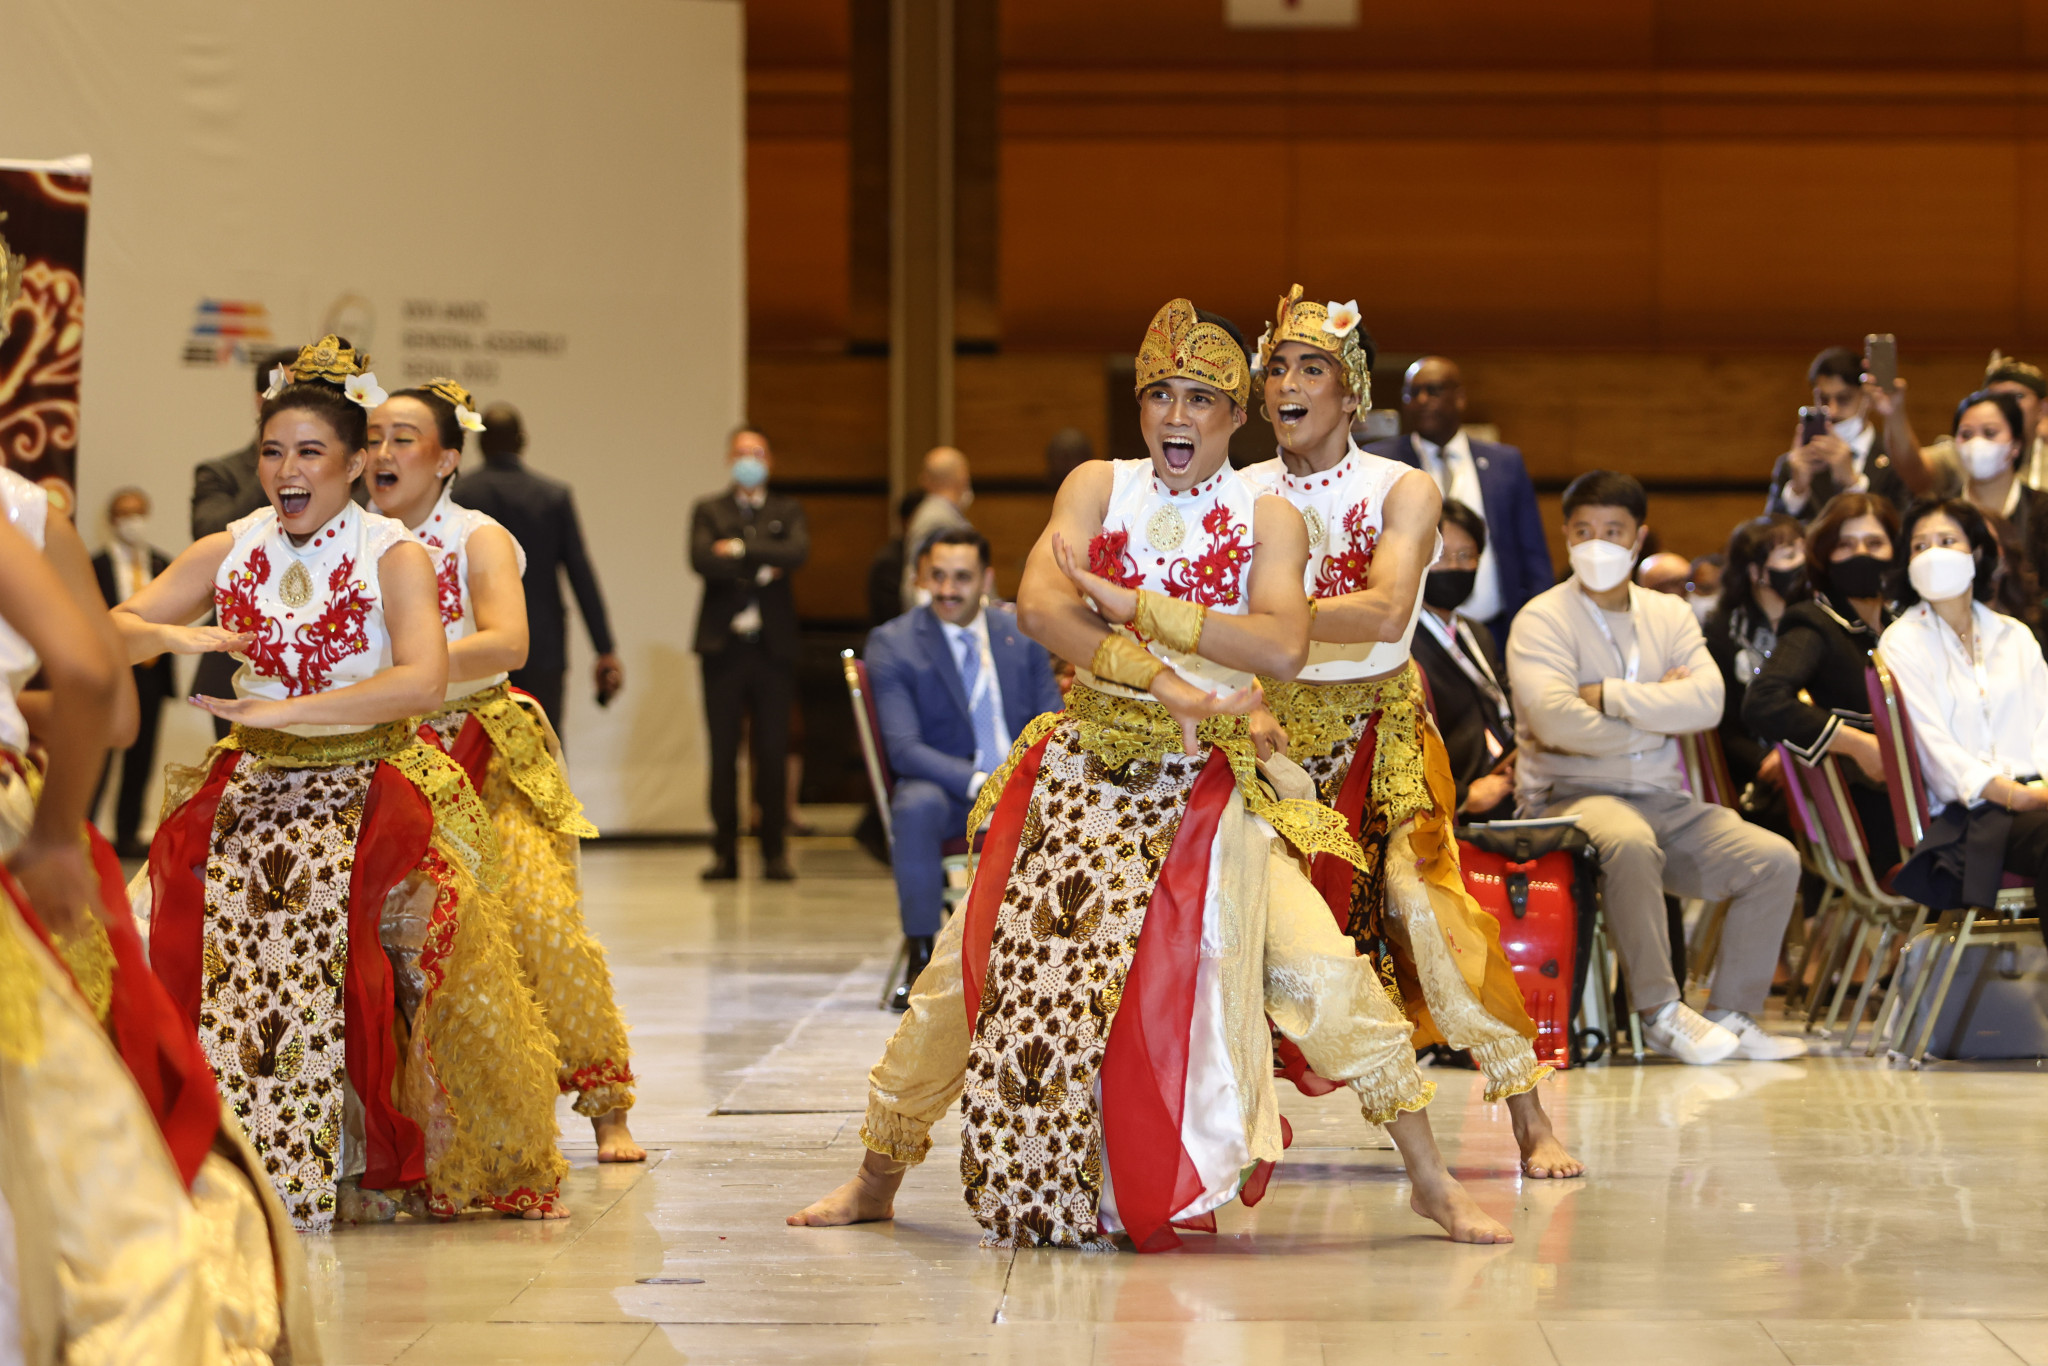 A cultural show was performed to delegates to mark next year's ANOC World Beach Games in Bali ©ANOC